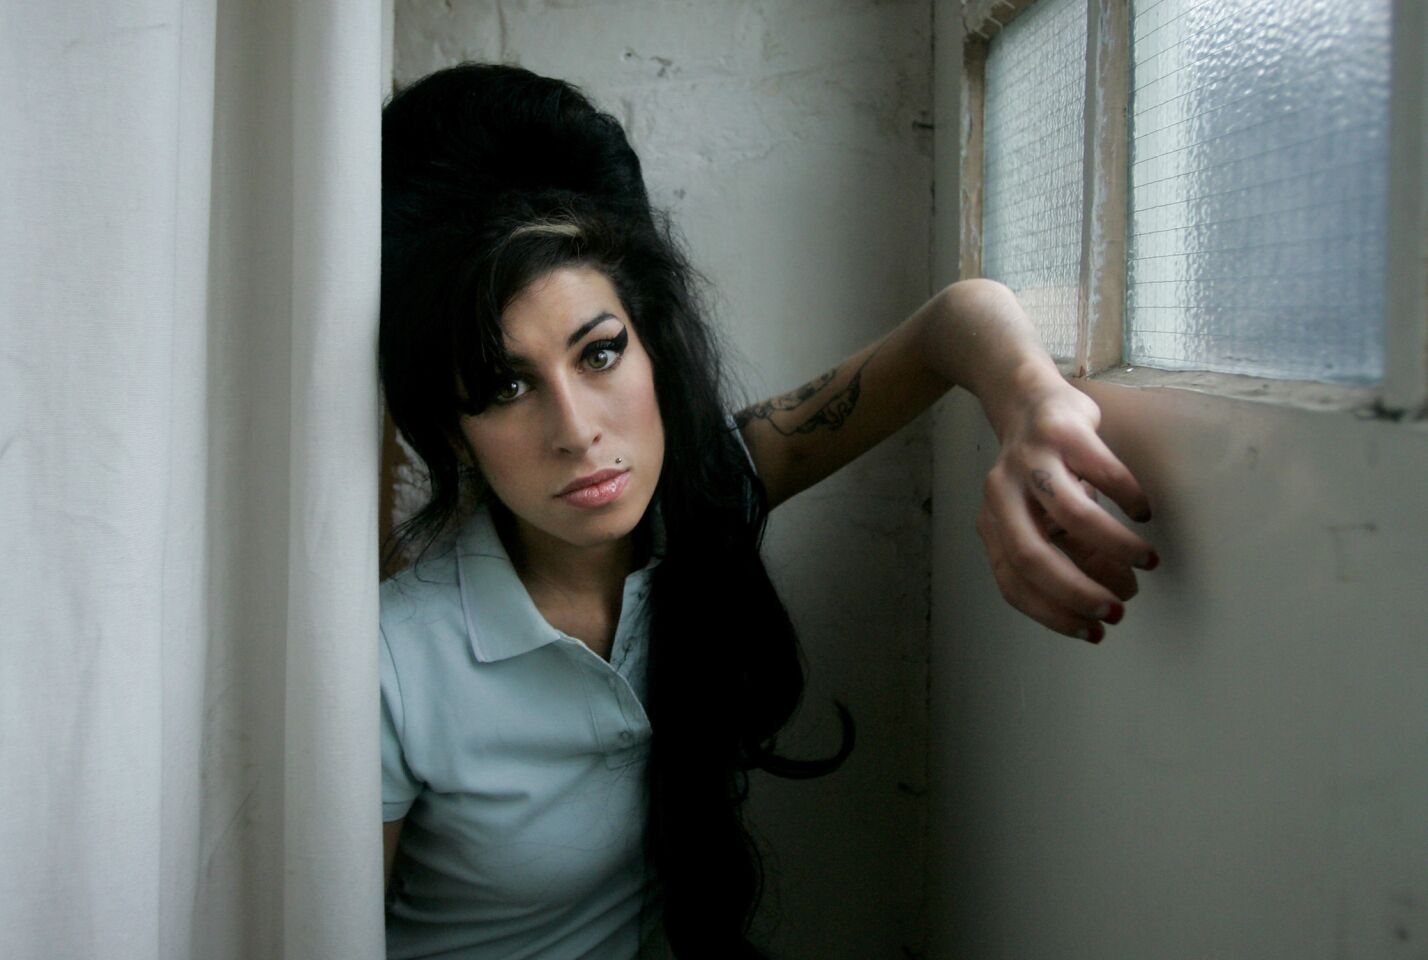 Singer Amy Winehouse, 27, died in July 2011 from accidental alcohol poisoning. She was the first British female to win five Grammys.